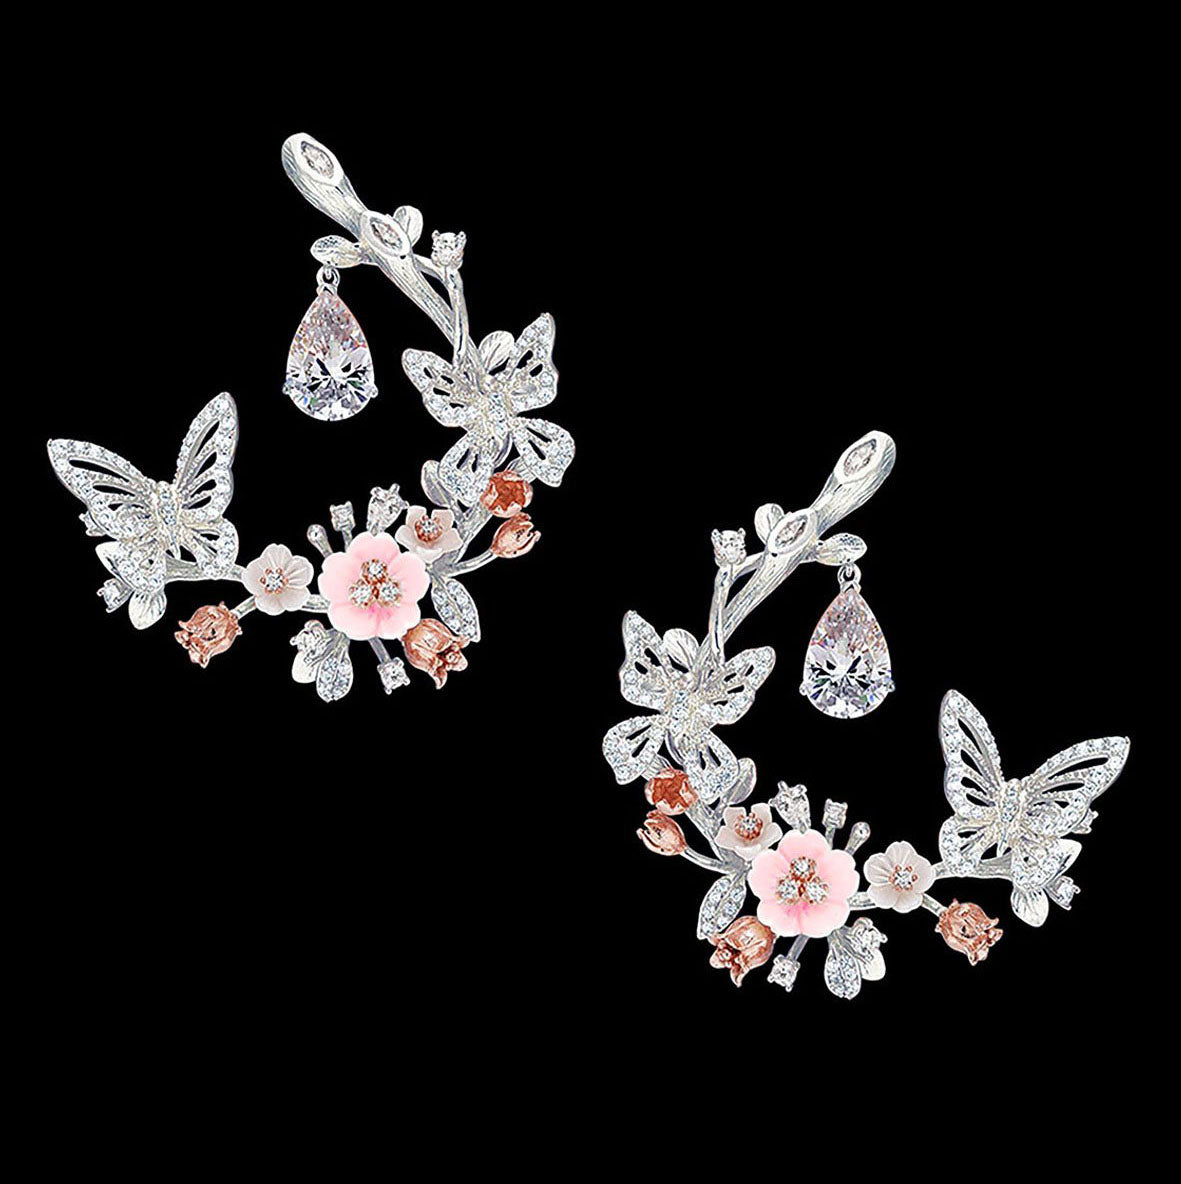 Rose Diamond Butterfly Garland Earrings, Earring, Anabela Chan Joaillerie - Fine jewelry with laboratory grown and created gemstones hand-crafted in the United Kingdom. Anabela Chan Joaillerie is the first fine jewellery brand in the world to champion laboratory-grown and created gemstones with high jewellery design, artisanal craftsmanship and a focus on ethical and sustainable innovations.